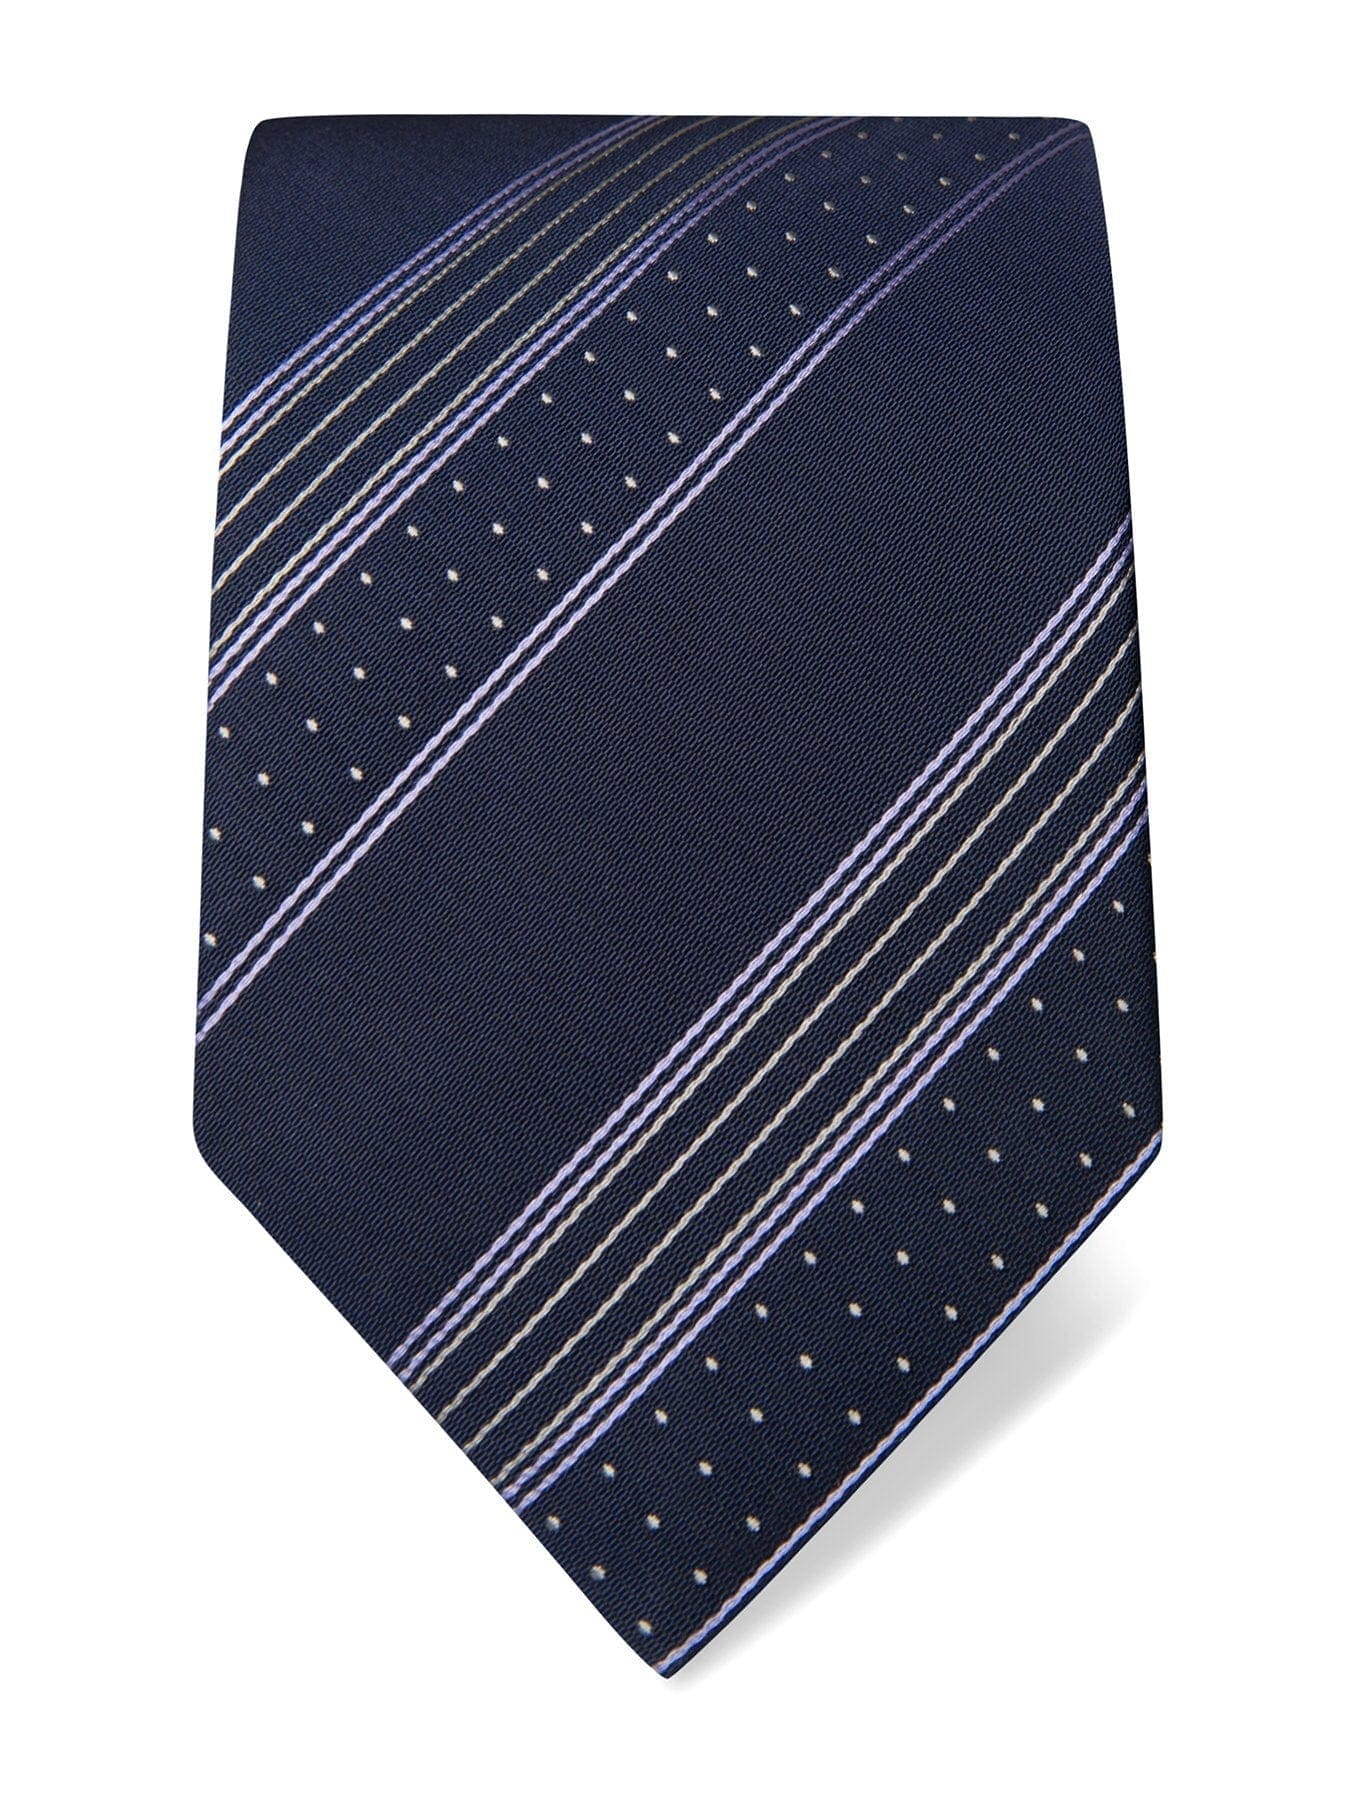 Navy Woven Silk Tie with Lilac & Silver Stripes